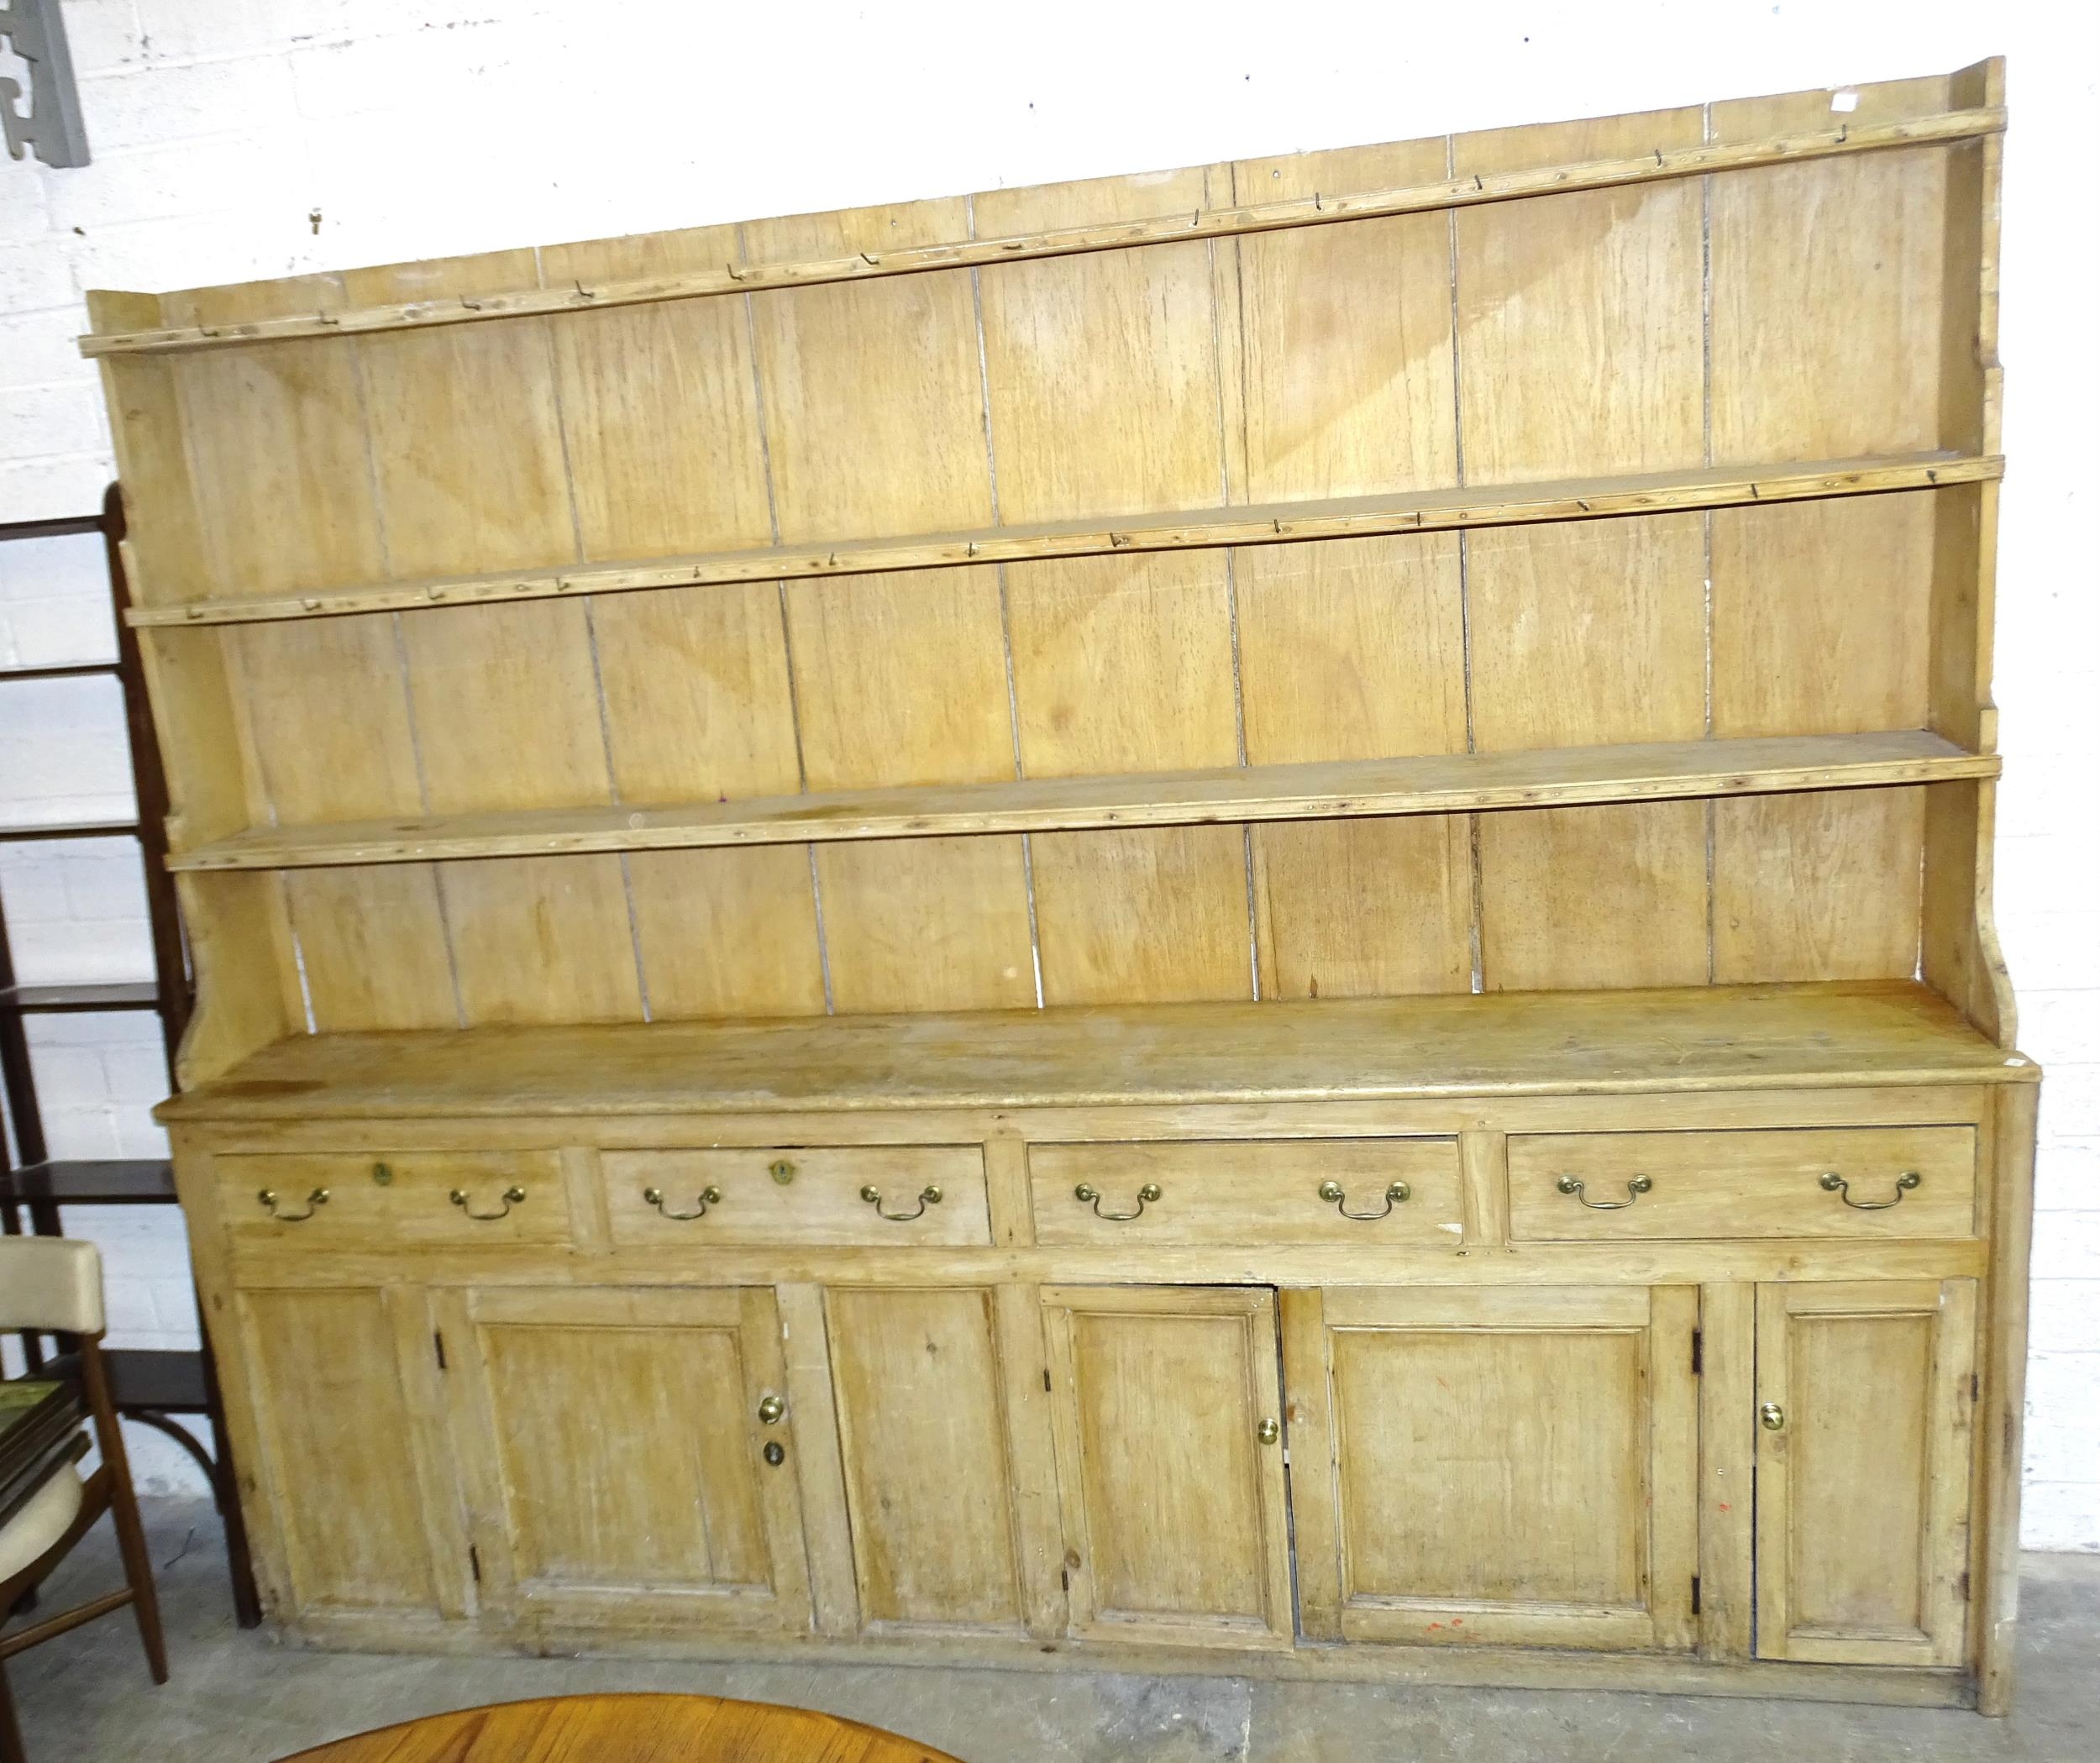 A Victorian pine kitchen dresser, the reduced plate rack with three shelves, the base with four